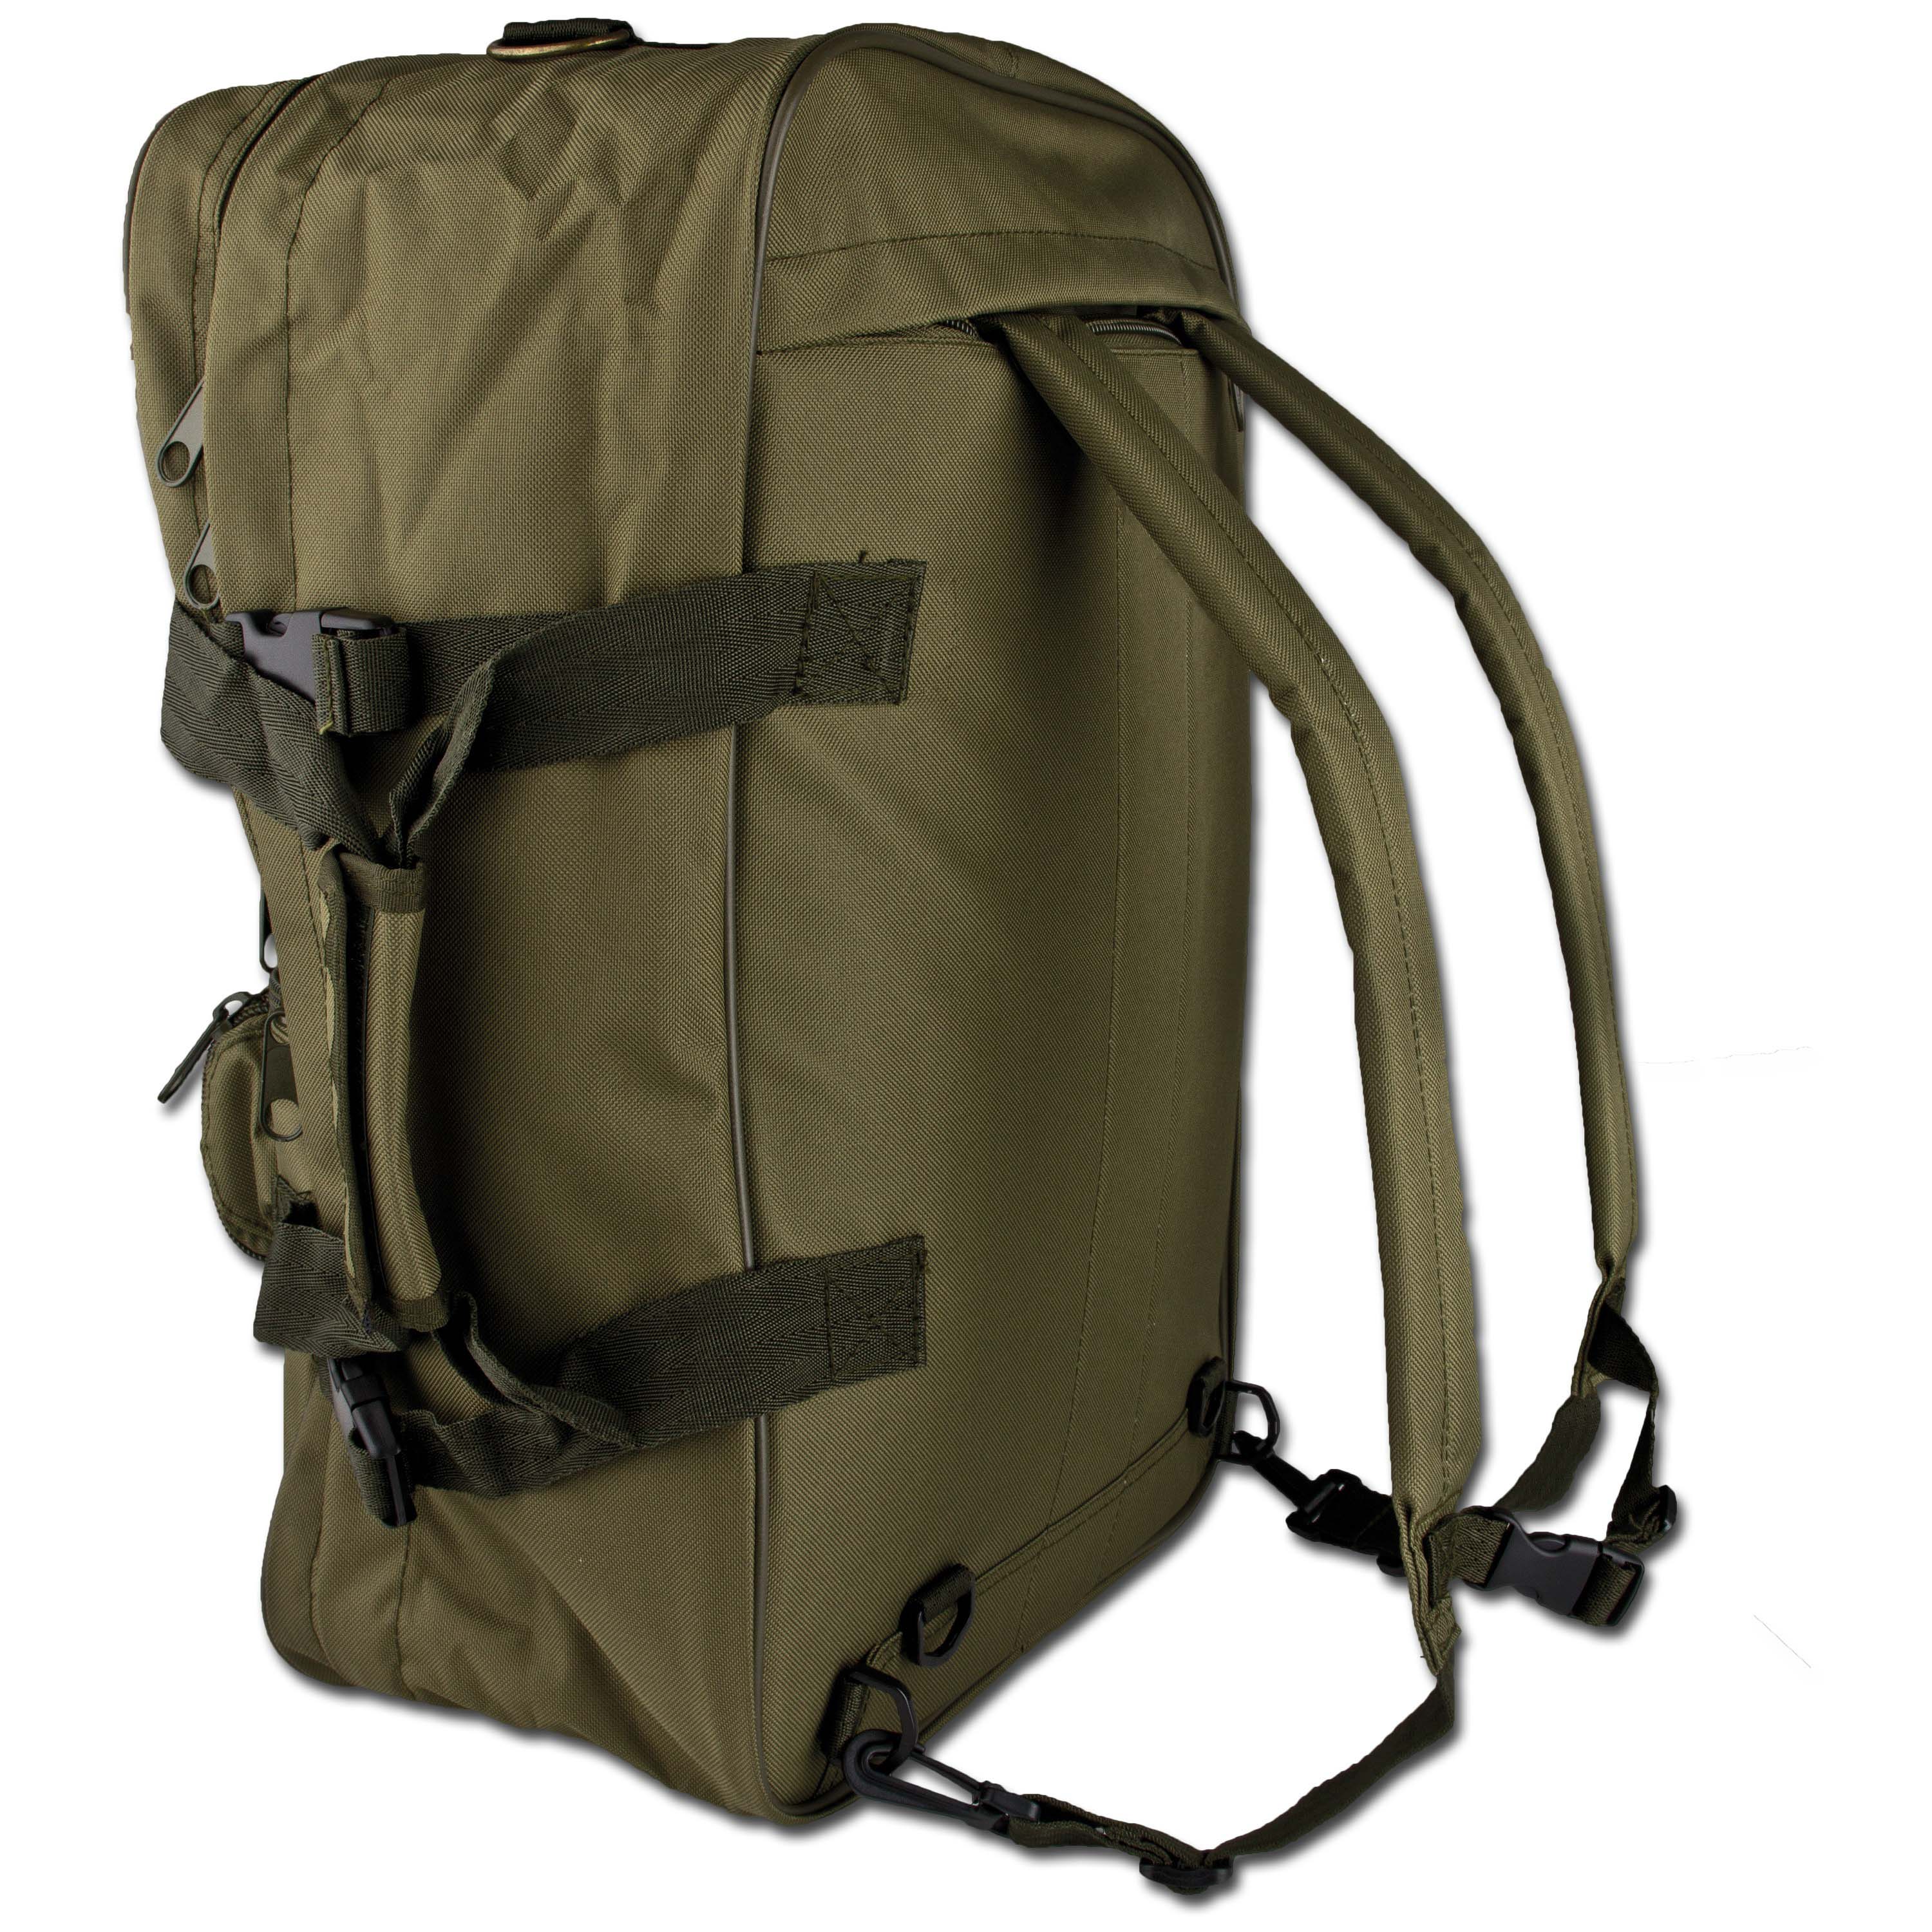 Purchase the Mil-Tec Cargo Bag olive green by ASMC